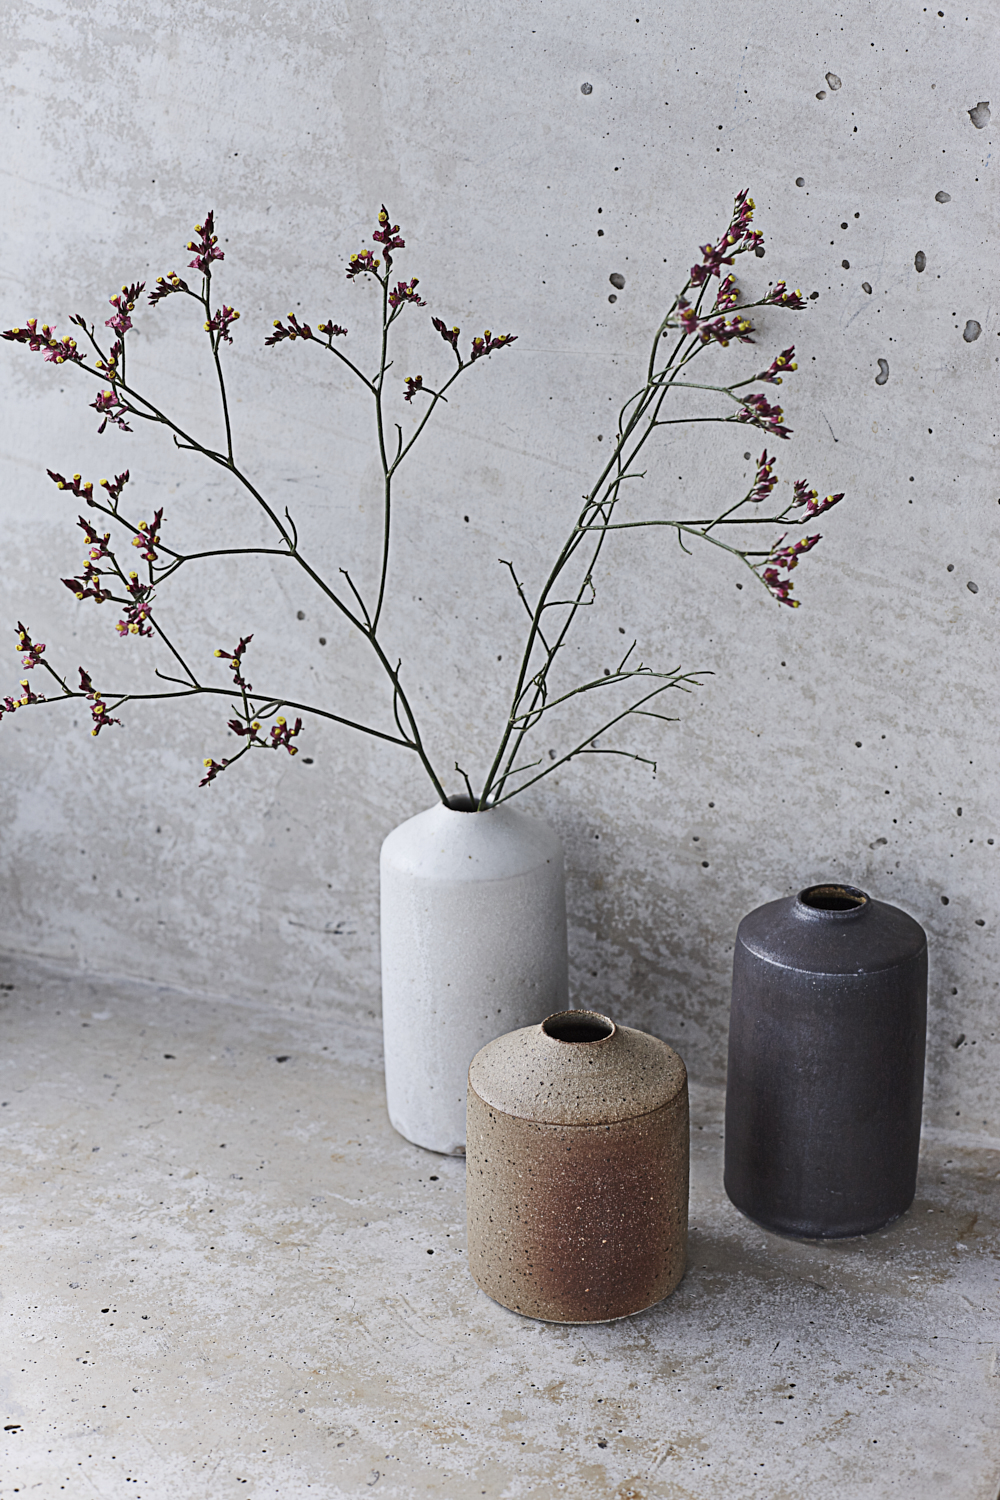 Ceramic vases and concrete. Still life photography by Joanna Henderson